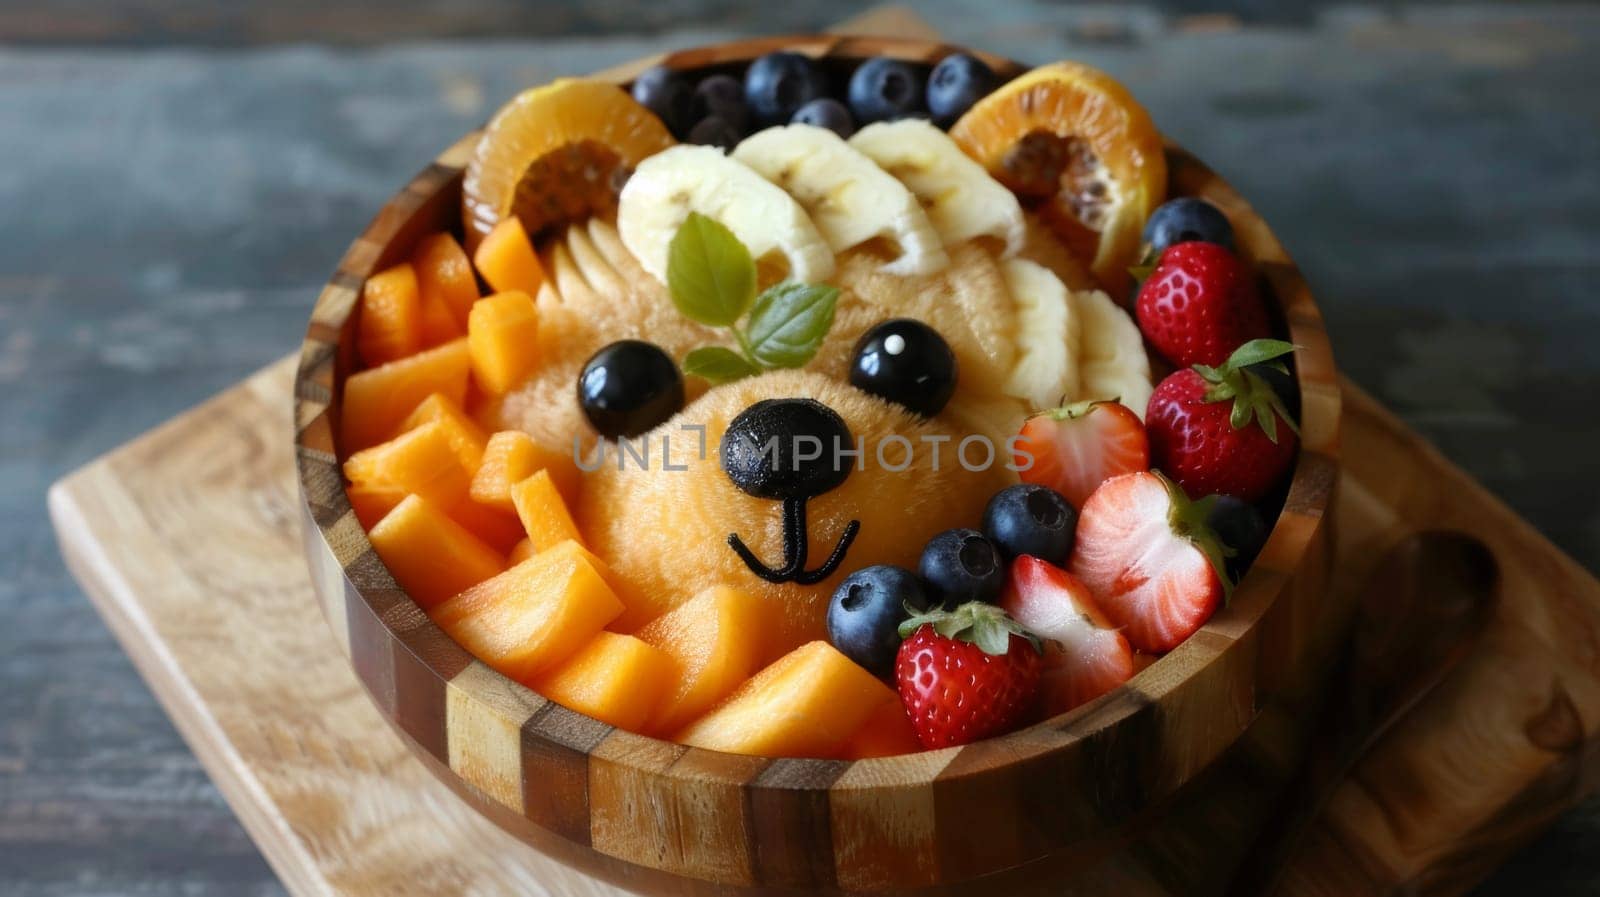 A bowl of fruit arranged in the shape of a bear's face